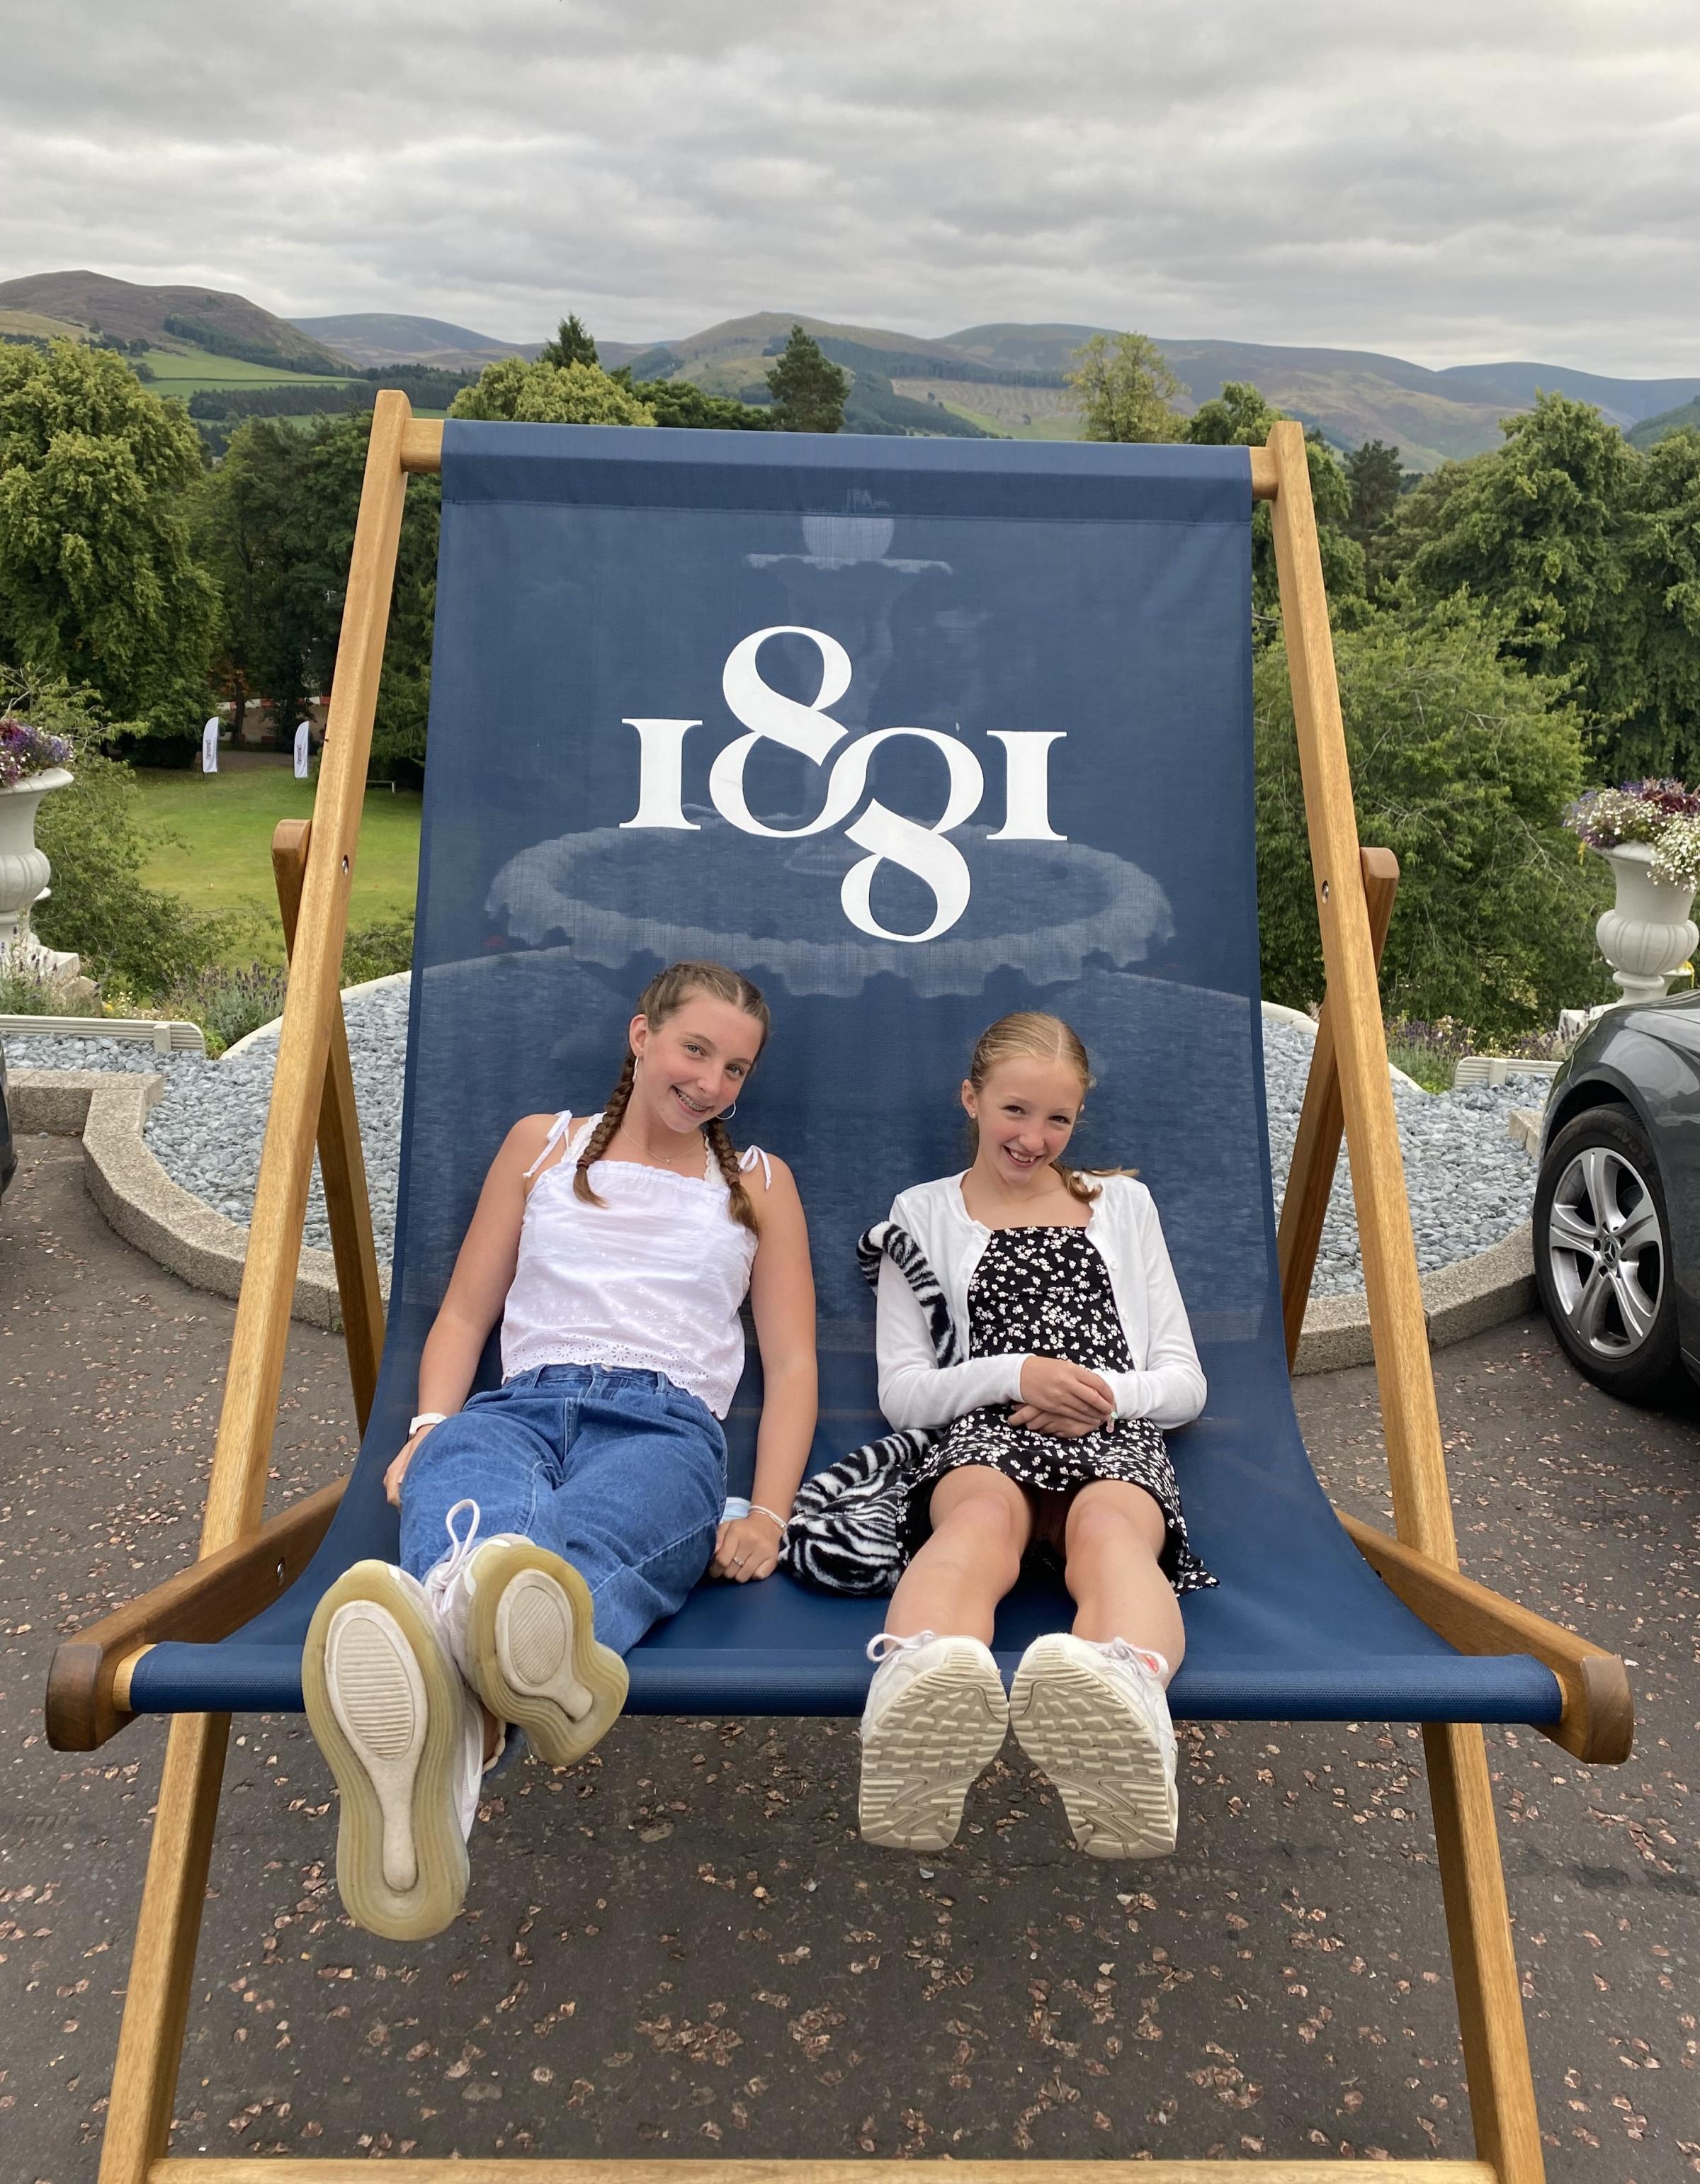 Isla and Evelyn in an outsize deckchair bearing the logo of the world-famous 1881 gin – every drop of which is taken from the hotel’s private spring, Shieldgreen